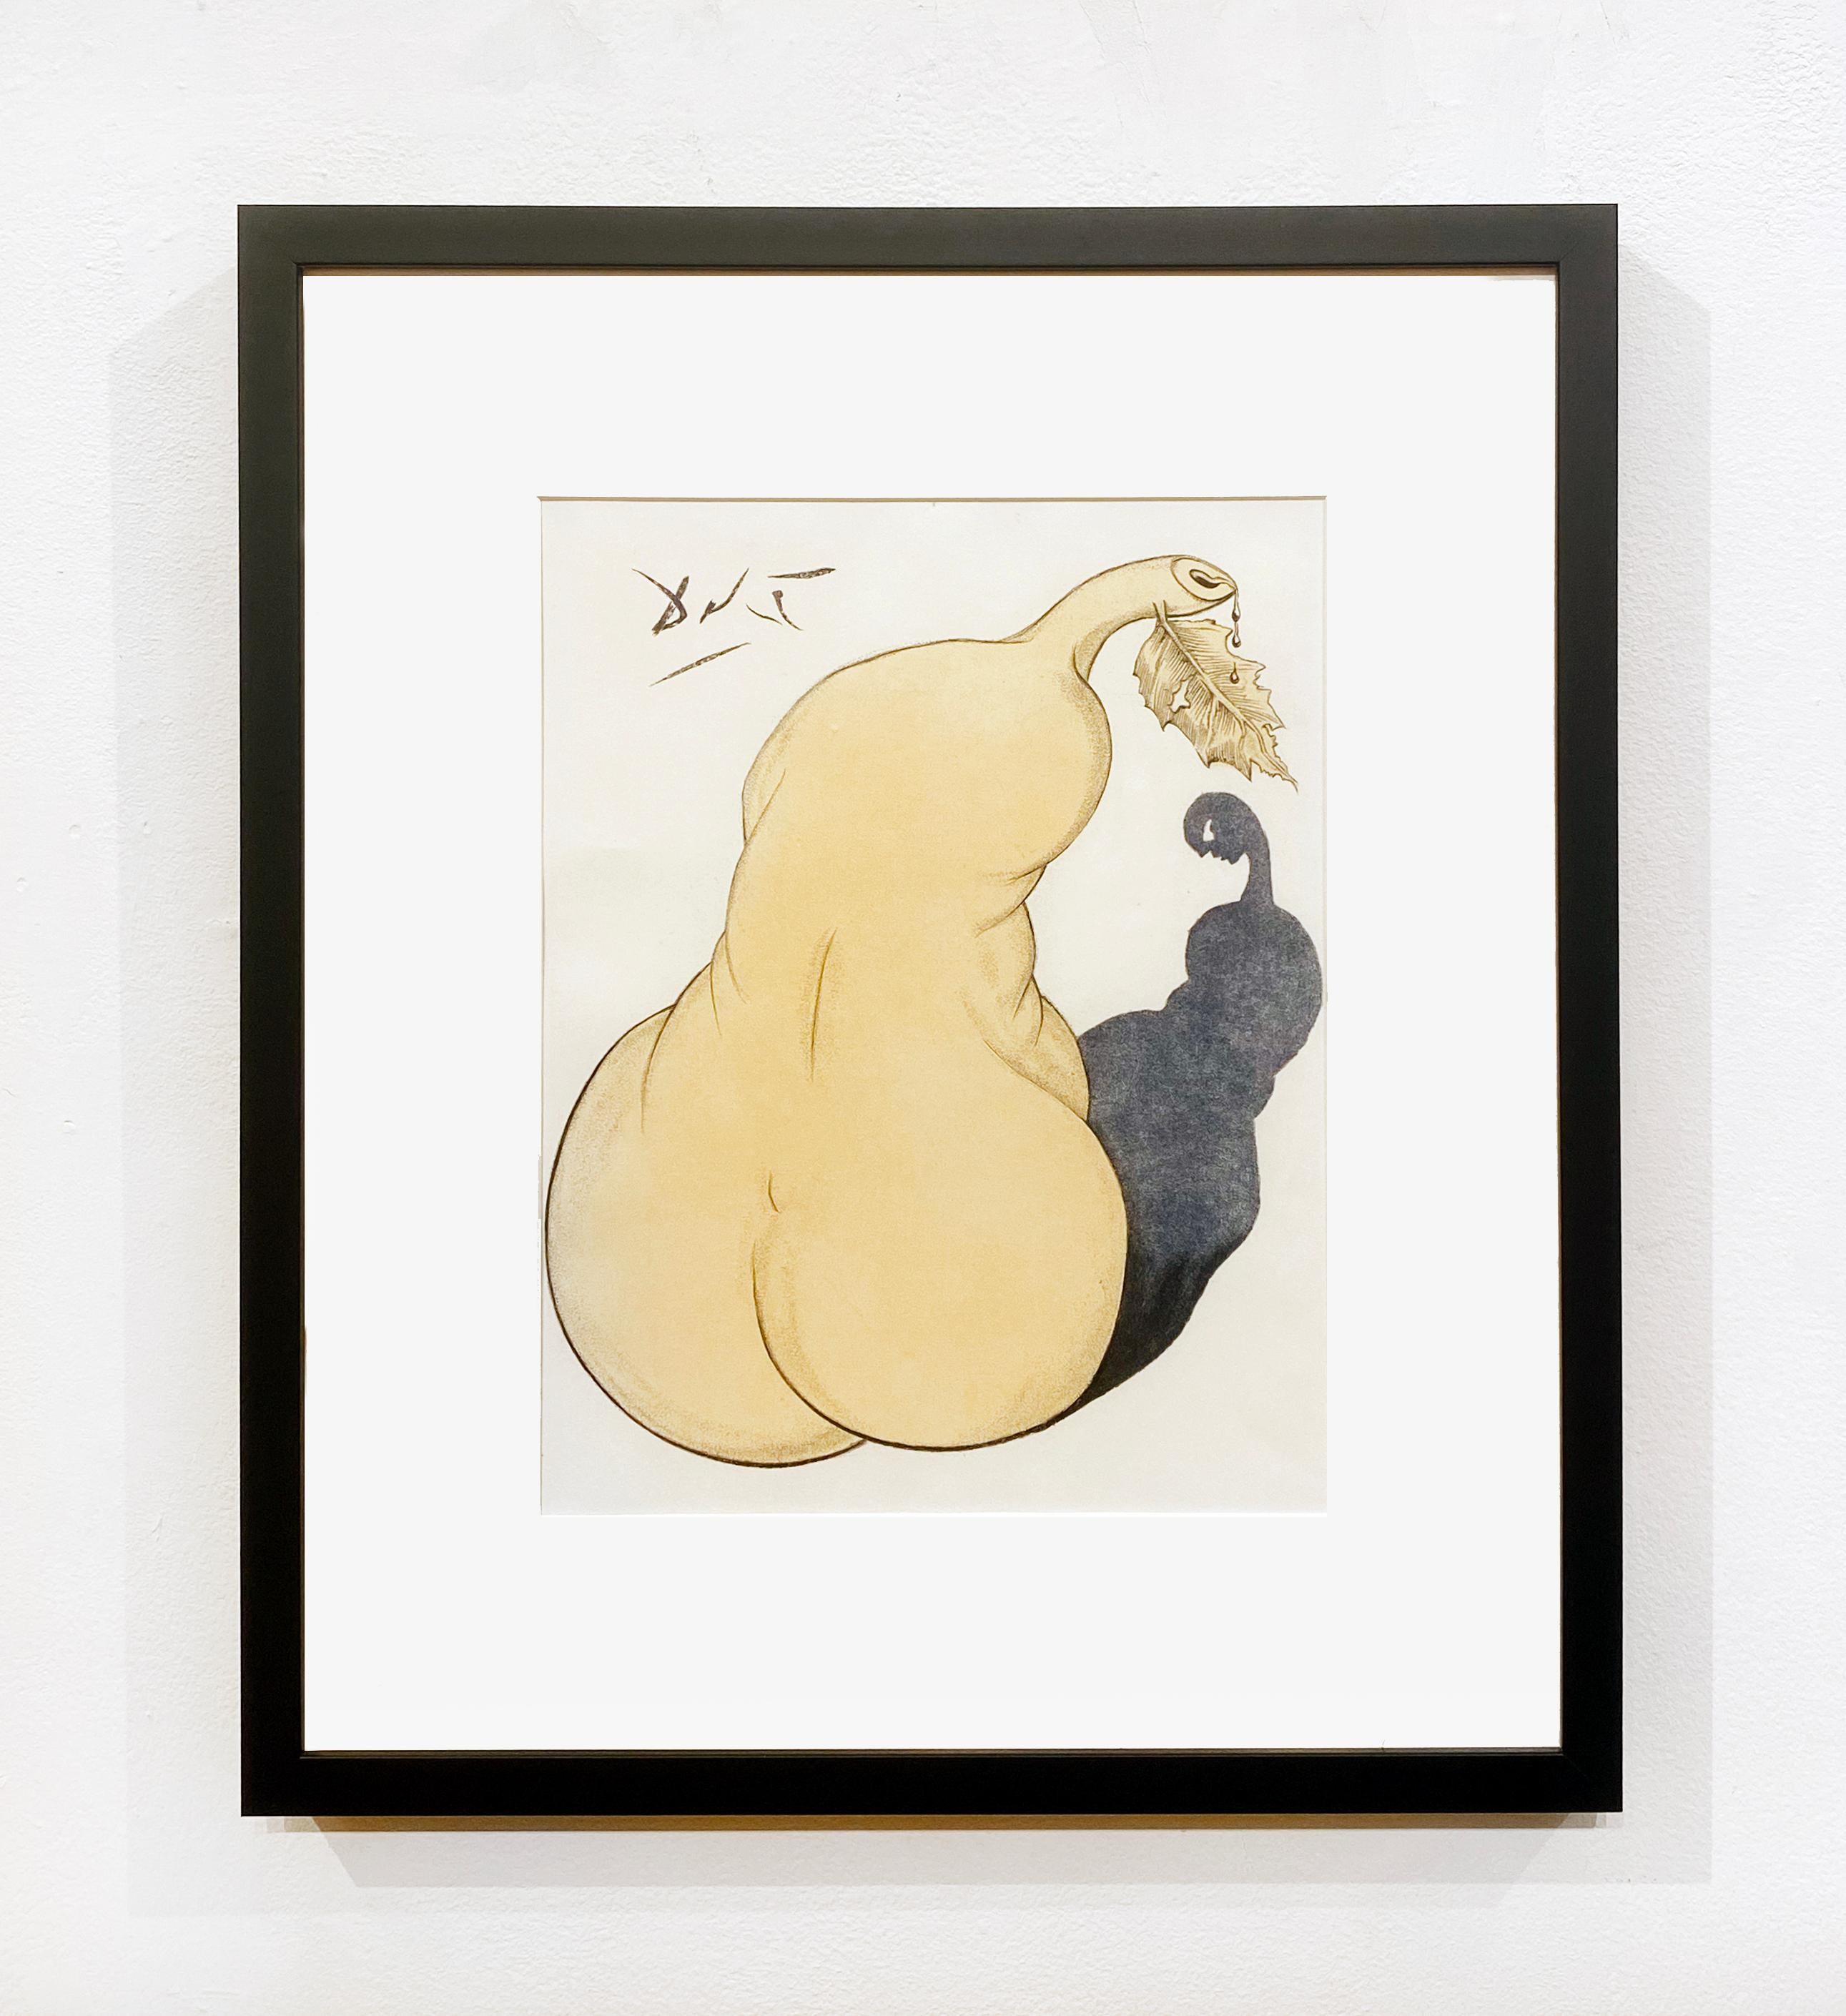 Pear and Nude Back - Surrealist Print by Salvador Dalí